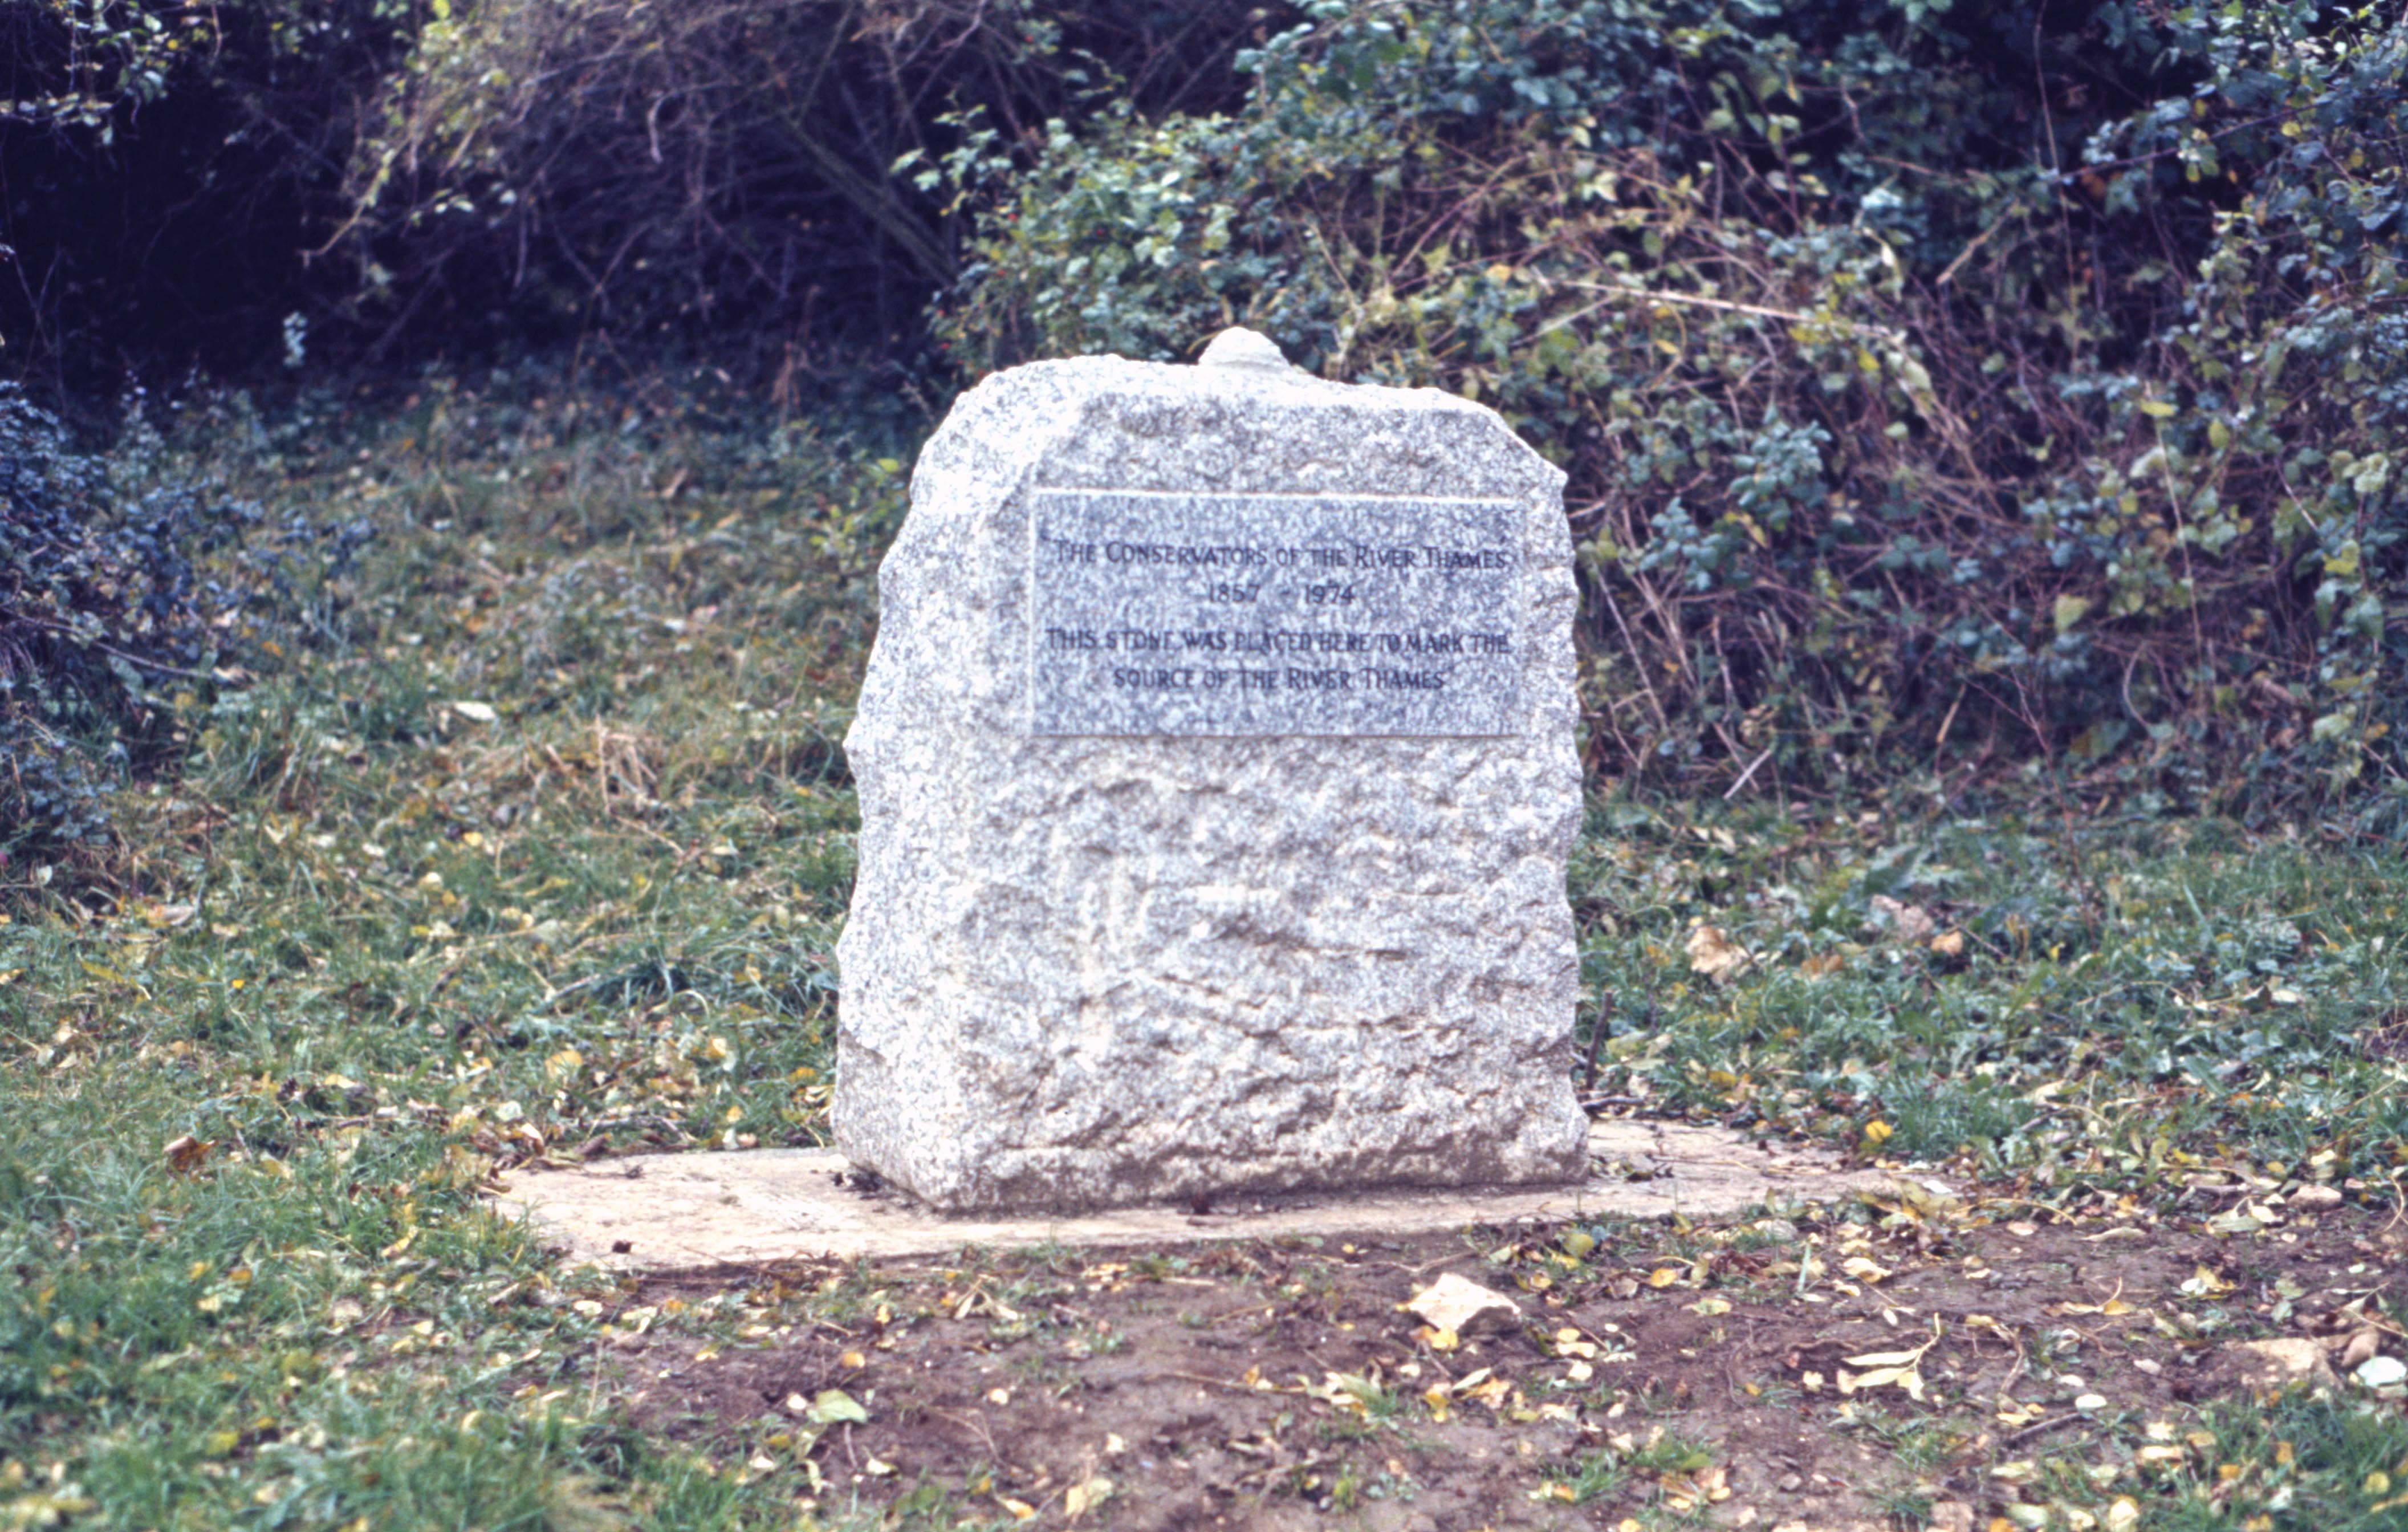 7404627 October 1974 - This stone marks start of the Thames.